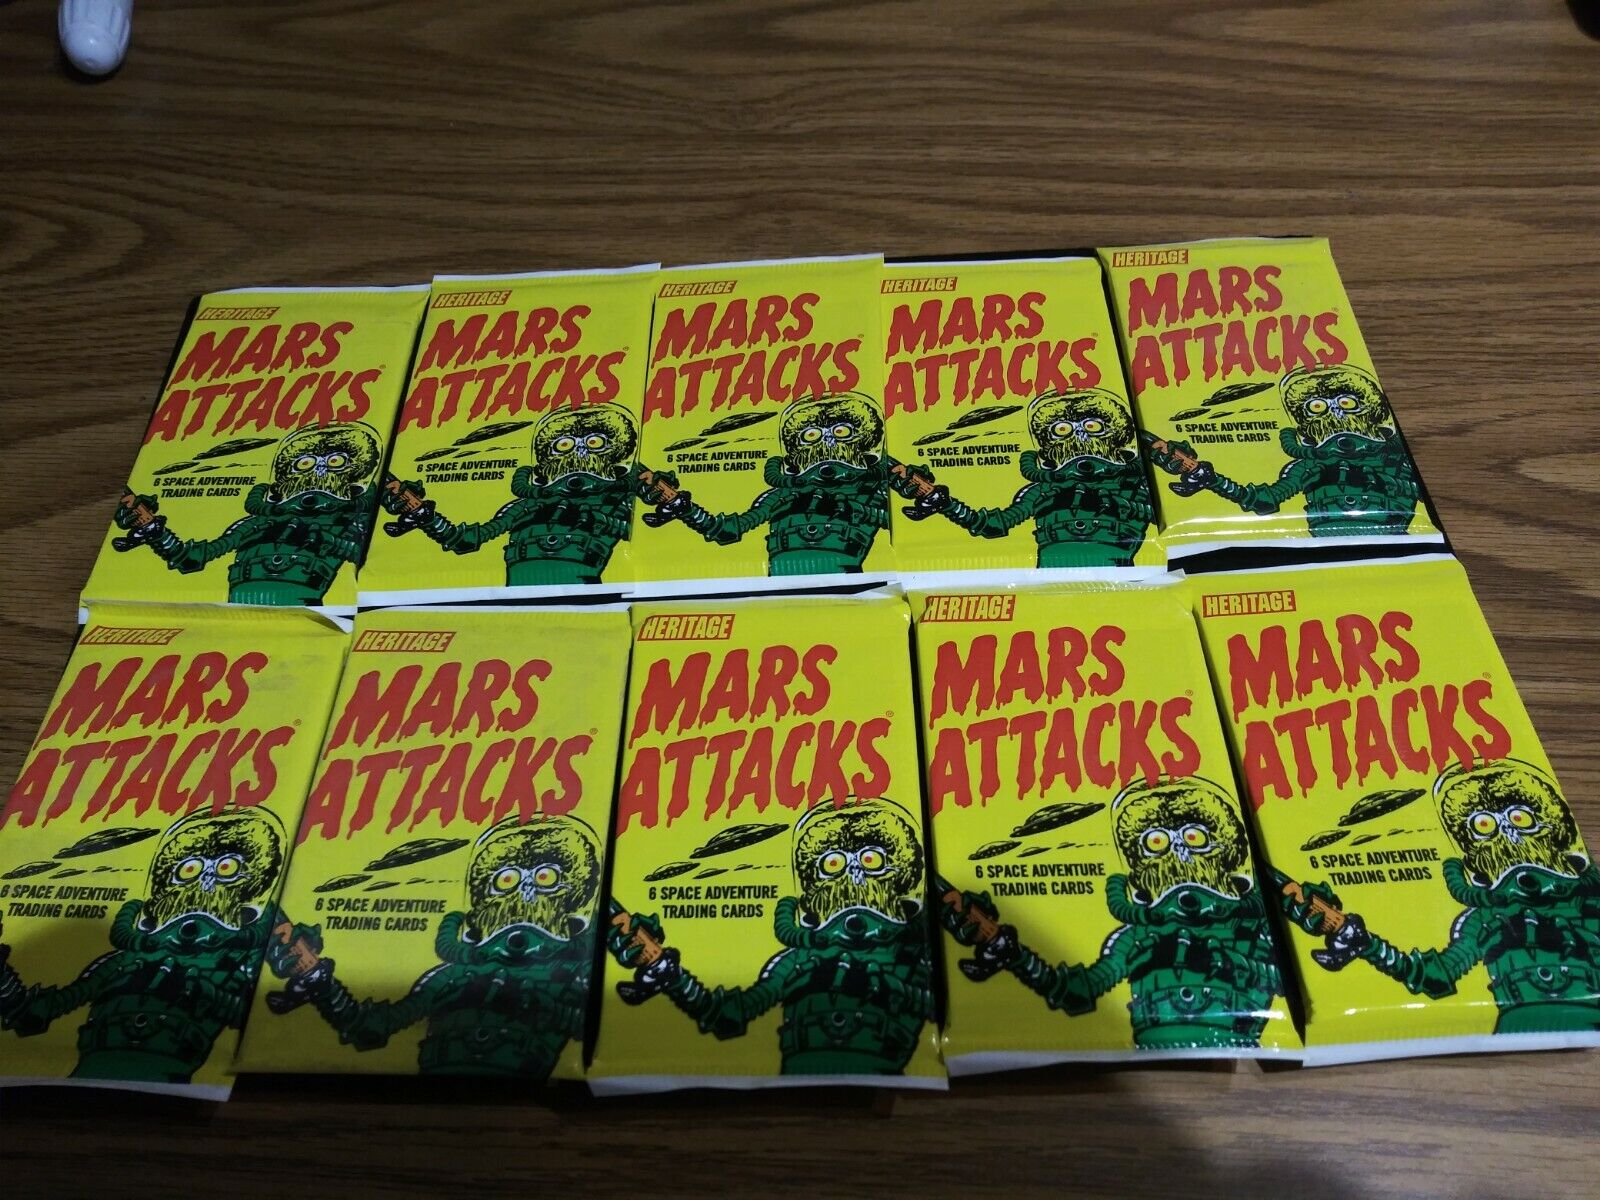 TOPPS HERITAGE MARS ATTACKS CARDS - 20 NEW SEALED PACKS - 2012 